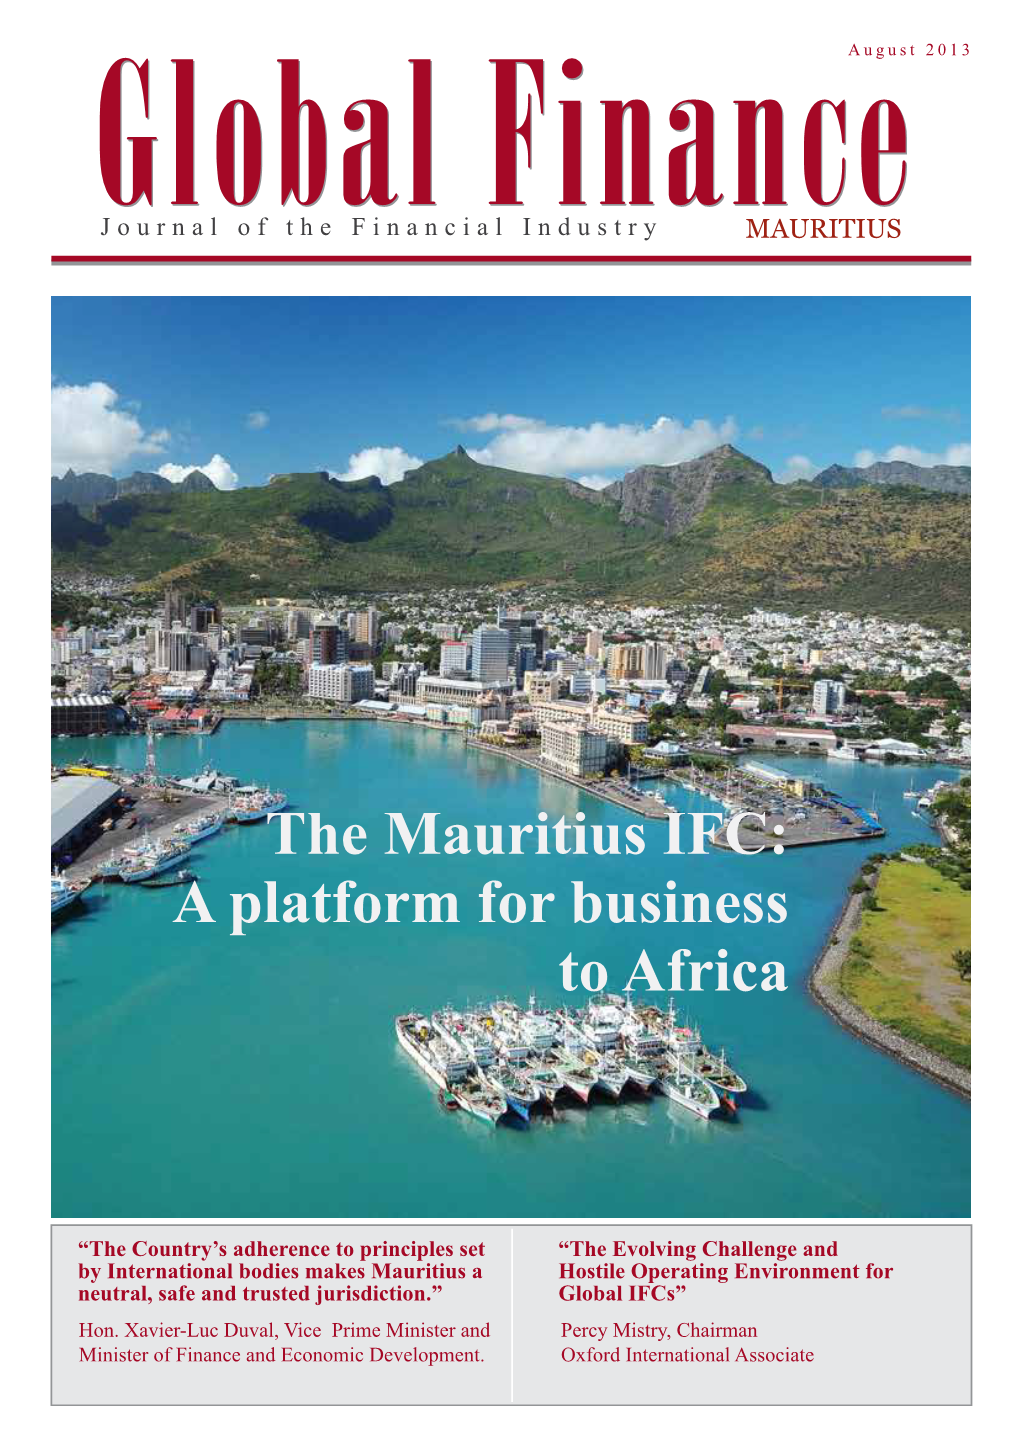 The Mauritius IFC: a Platform for Business to Africa